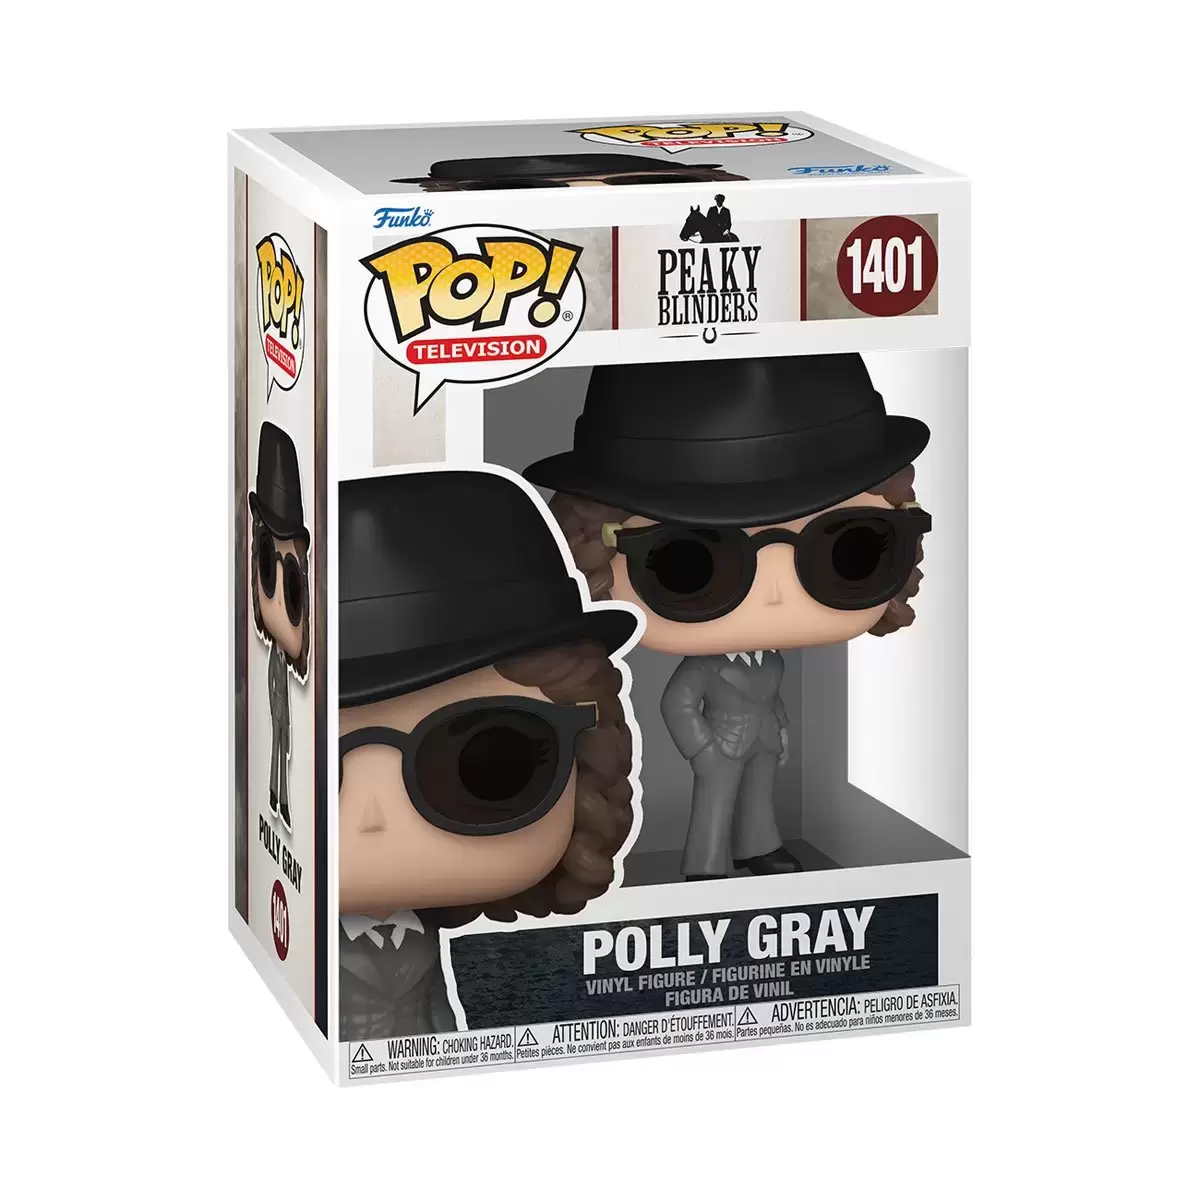 POP! Television - Peaky Blinders - Polly Gray